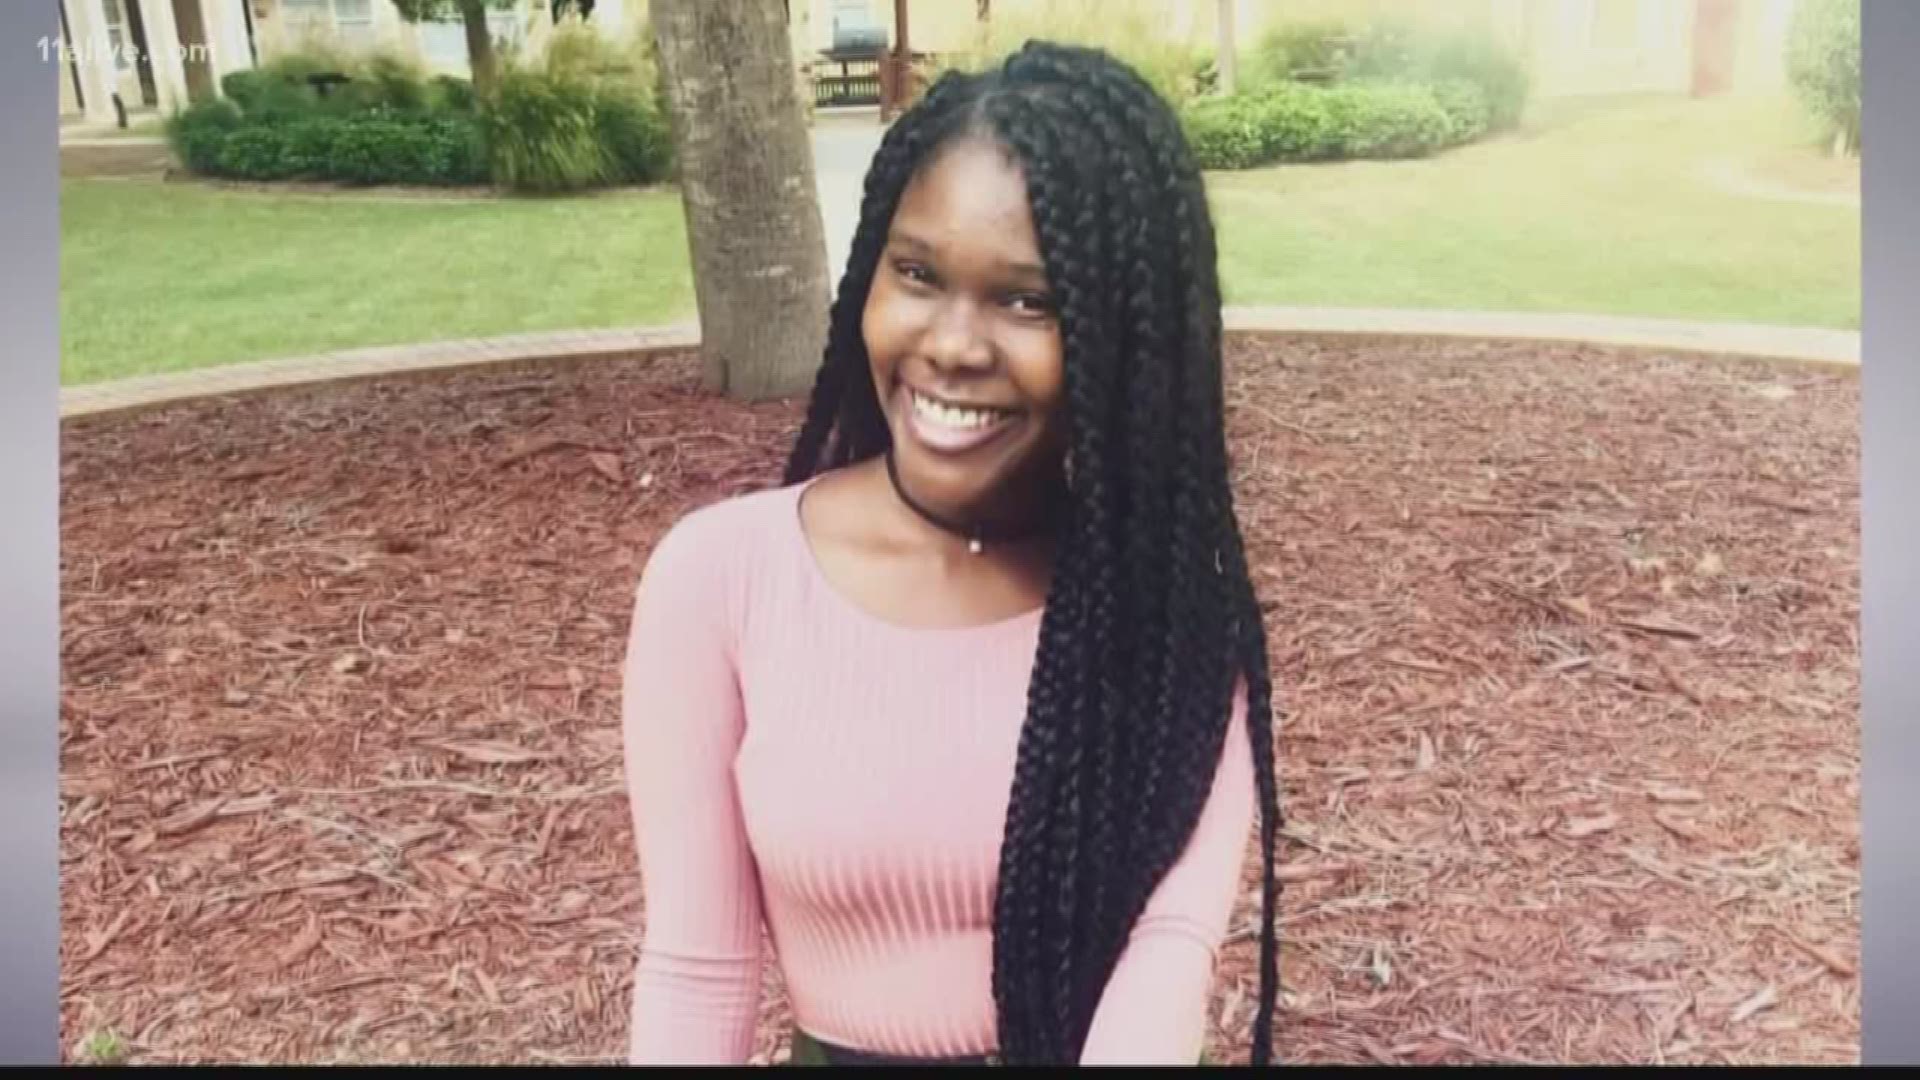 The funds will be used for funeral expenses after the Clark Atlanta University student was killed